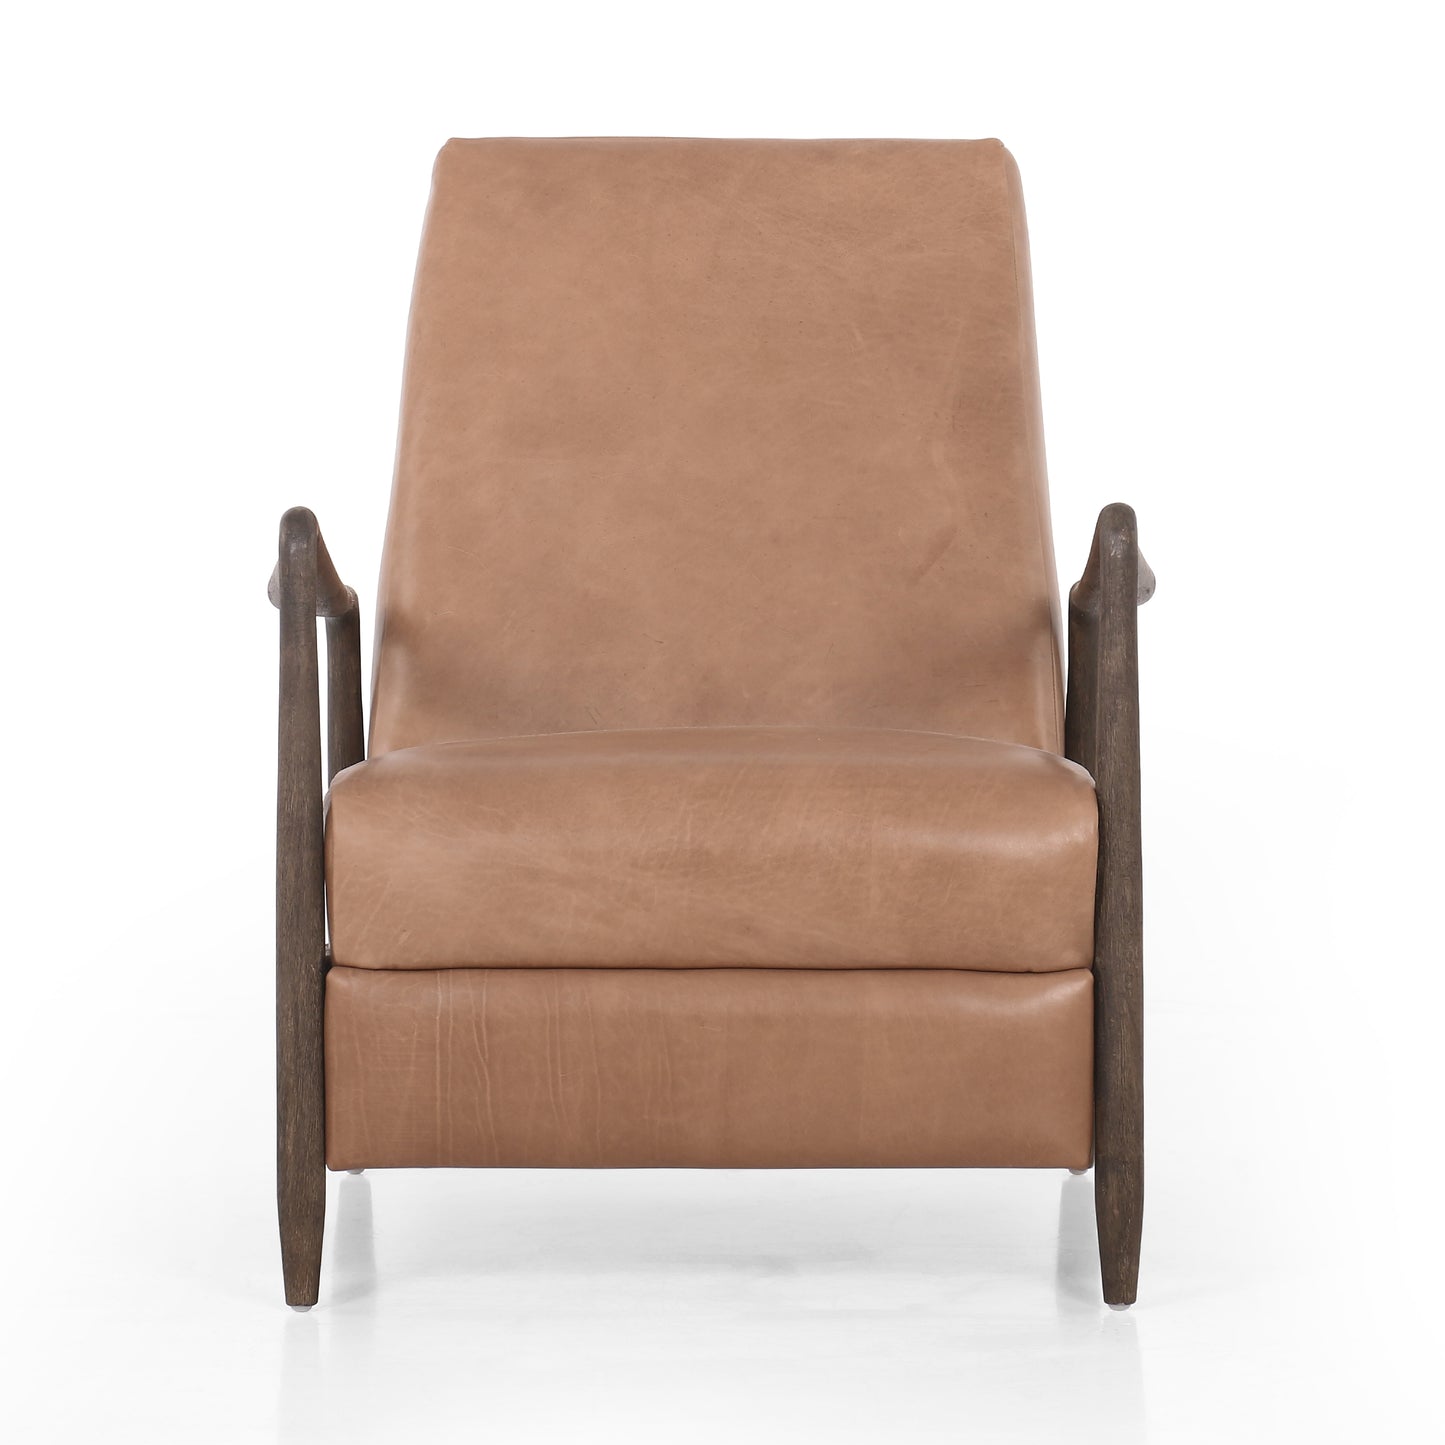 Load image into Gallery viewer, Braden Recliner Arm Chairs, Recliners &amp;amp; Sleeper Chairs Four Hands     Four Hands, Mid Century Modern Furniture, Old Bones Furniture Company, Old Bones Co, Modern Mid Century, Designer Furniture, https://www.oldbonesco.com/
